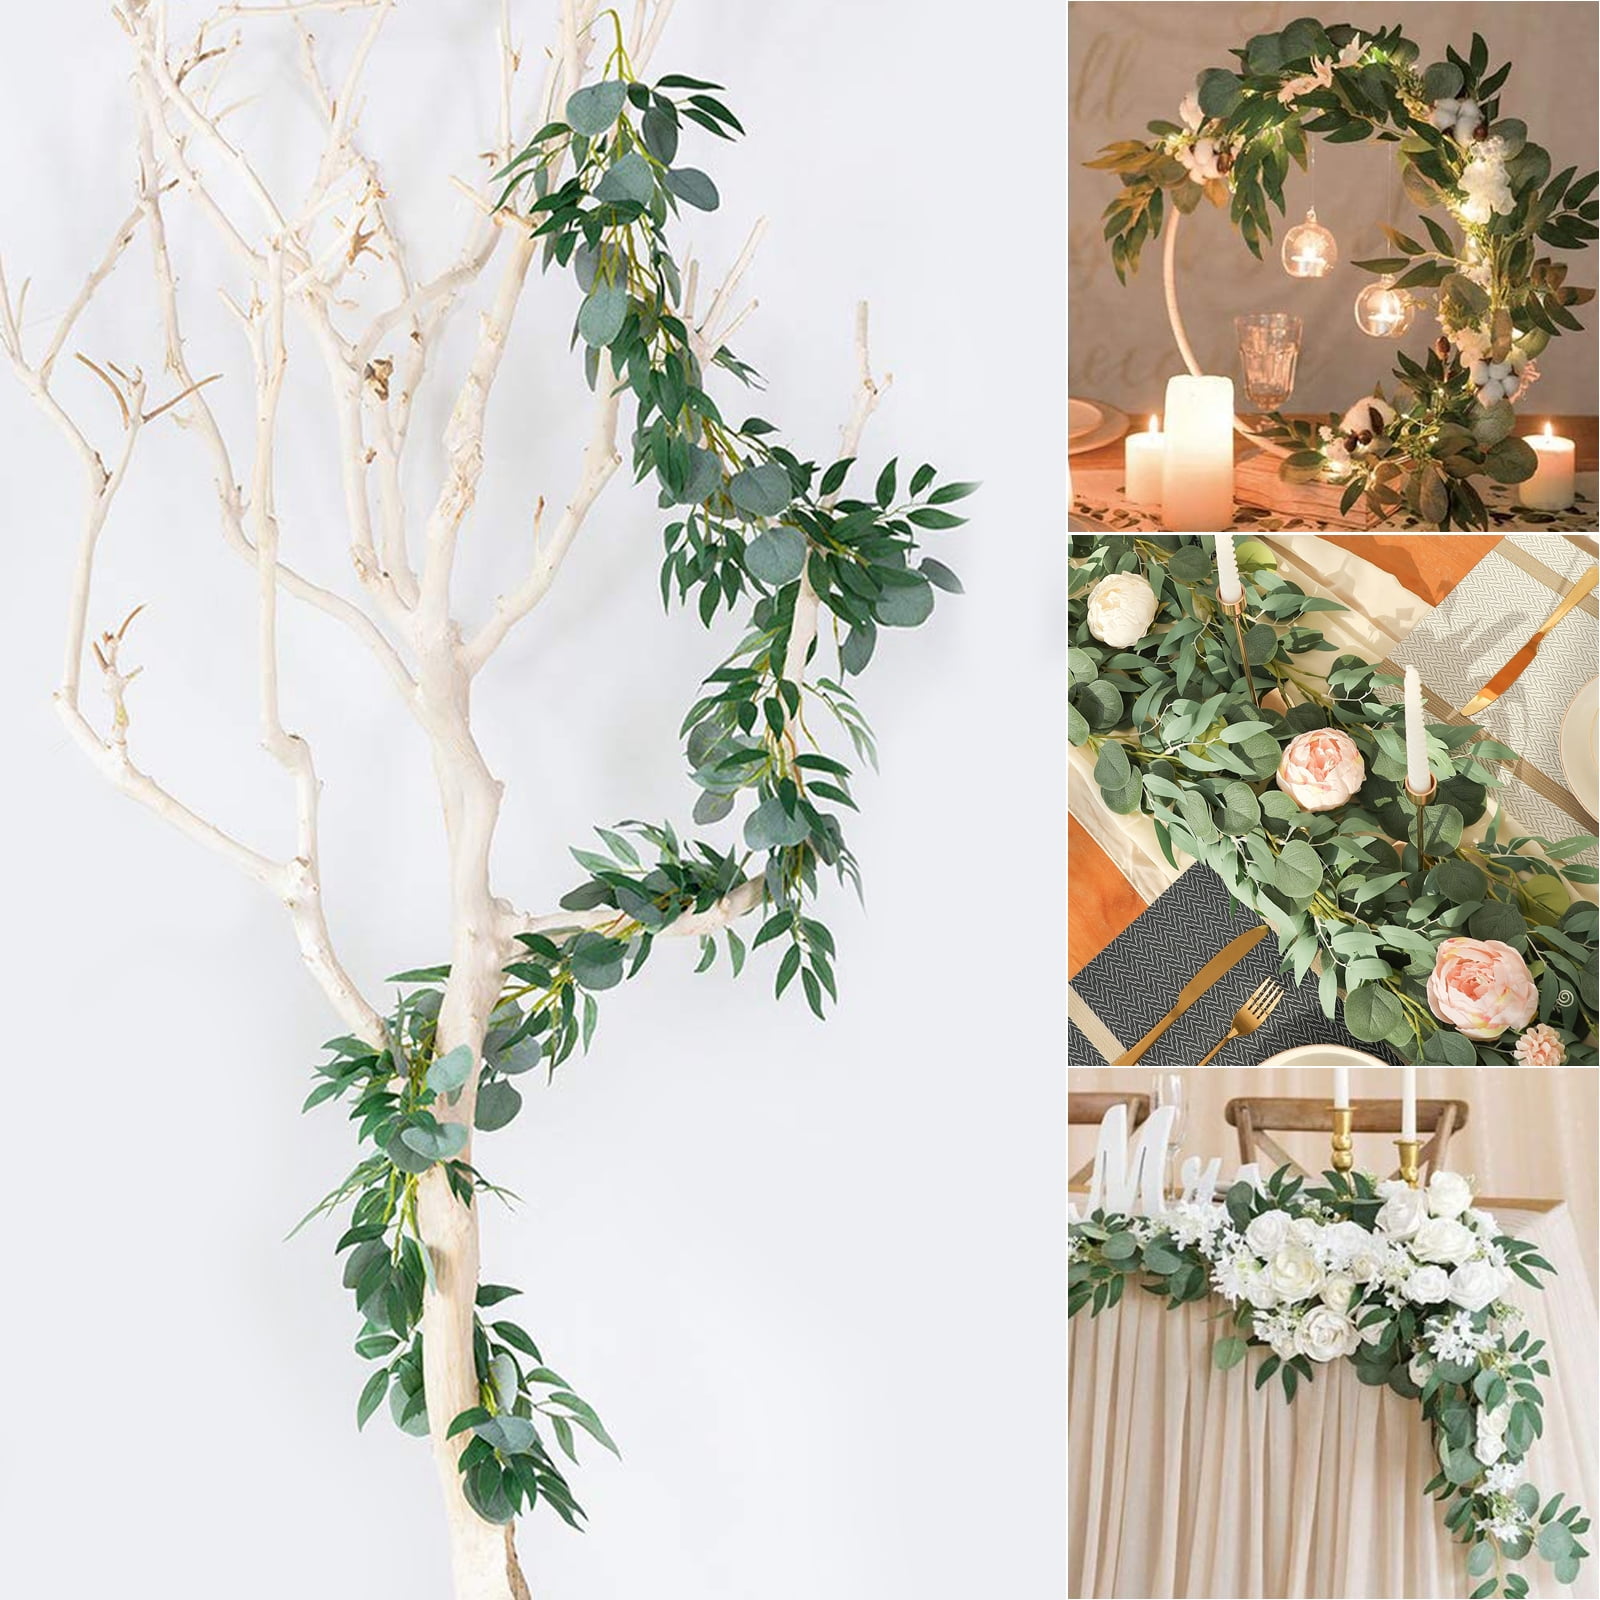 Artificial Eucalyptus Leaves Garland Vine Wedding For Home Wall Party Decor 